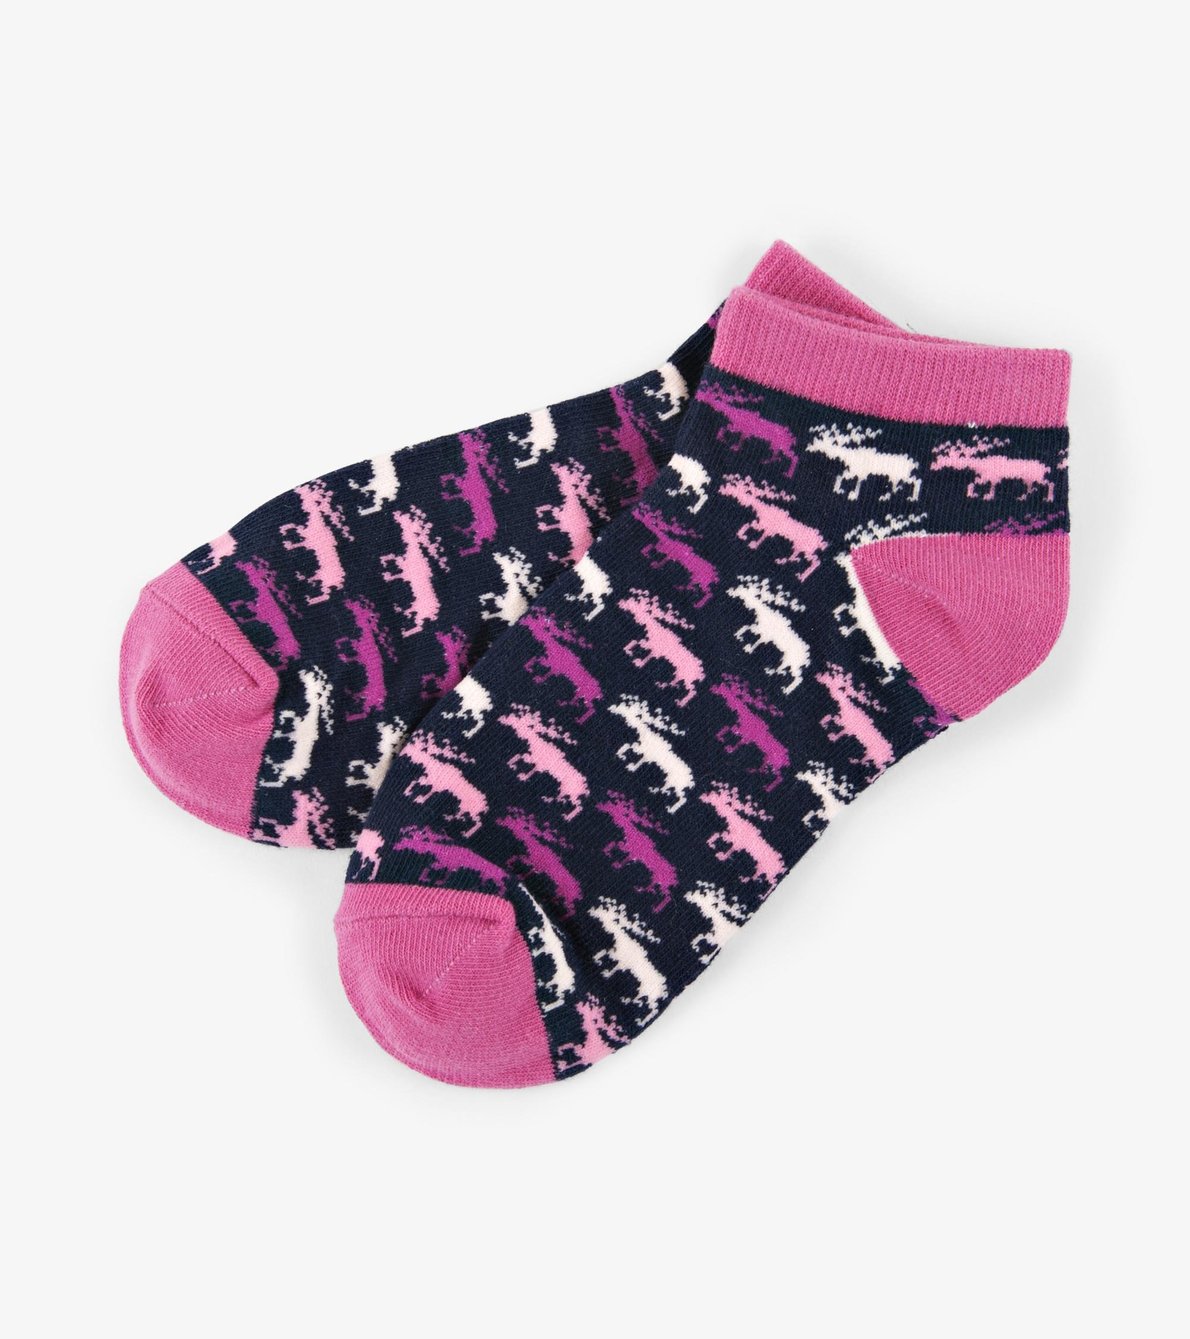 View larger image of Cottage Moose Women's Ankle Socks